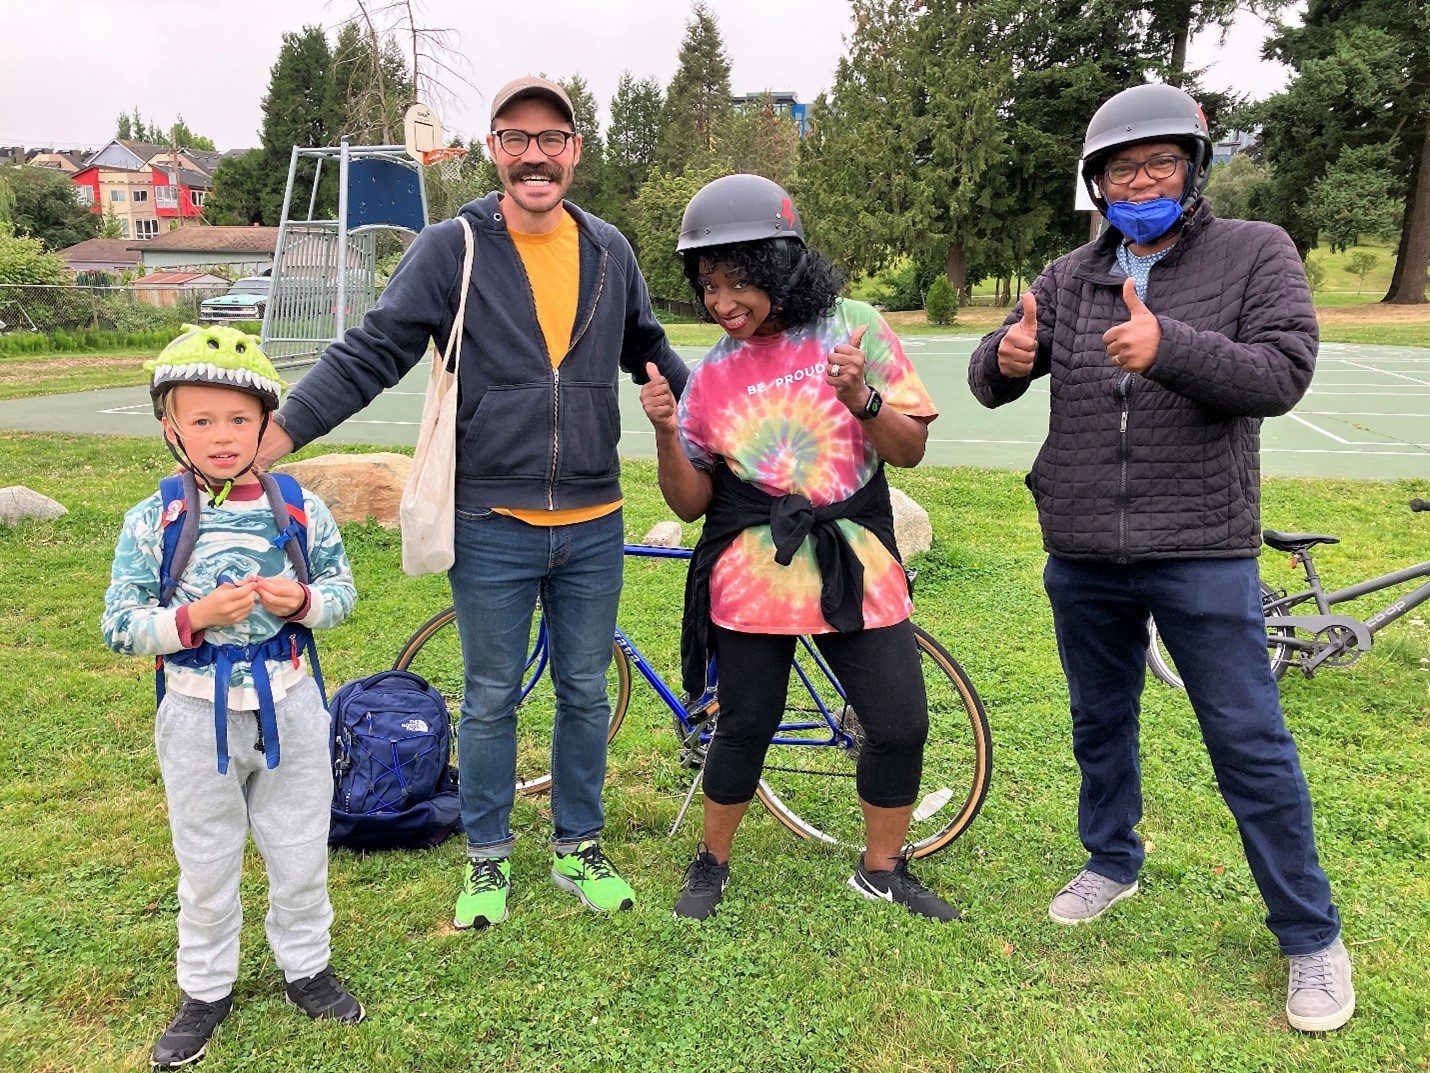 Four people post for a photo on a grassy field. A young person on the left wears a helmet, and the people are smiling.